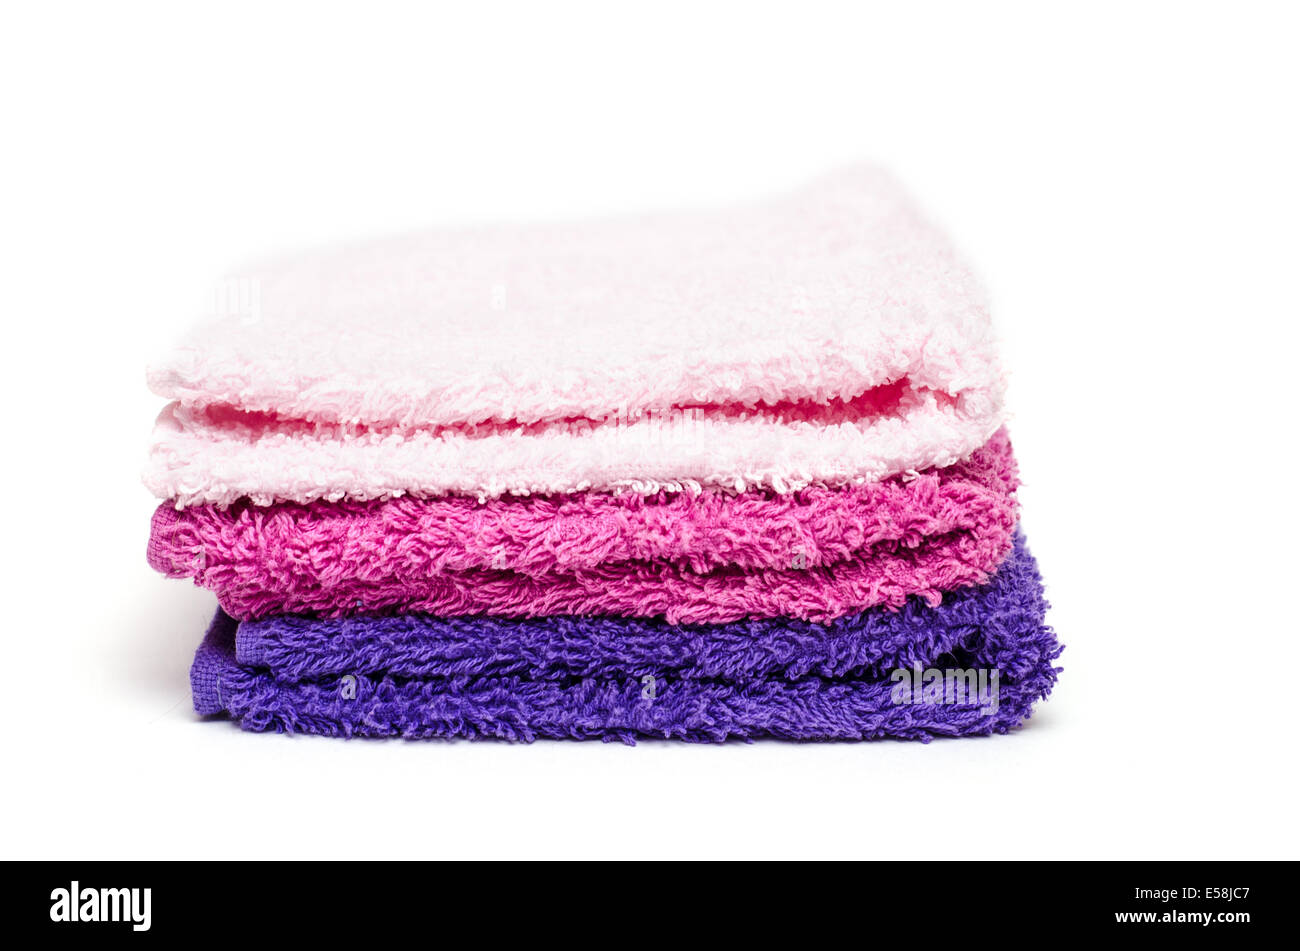 https://c8.alamy.com/comp/E58JC7/stack-of-different-colored-washcloth-of-terry-cloth-E58JC7.jpg